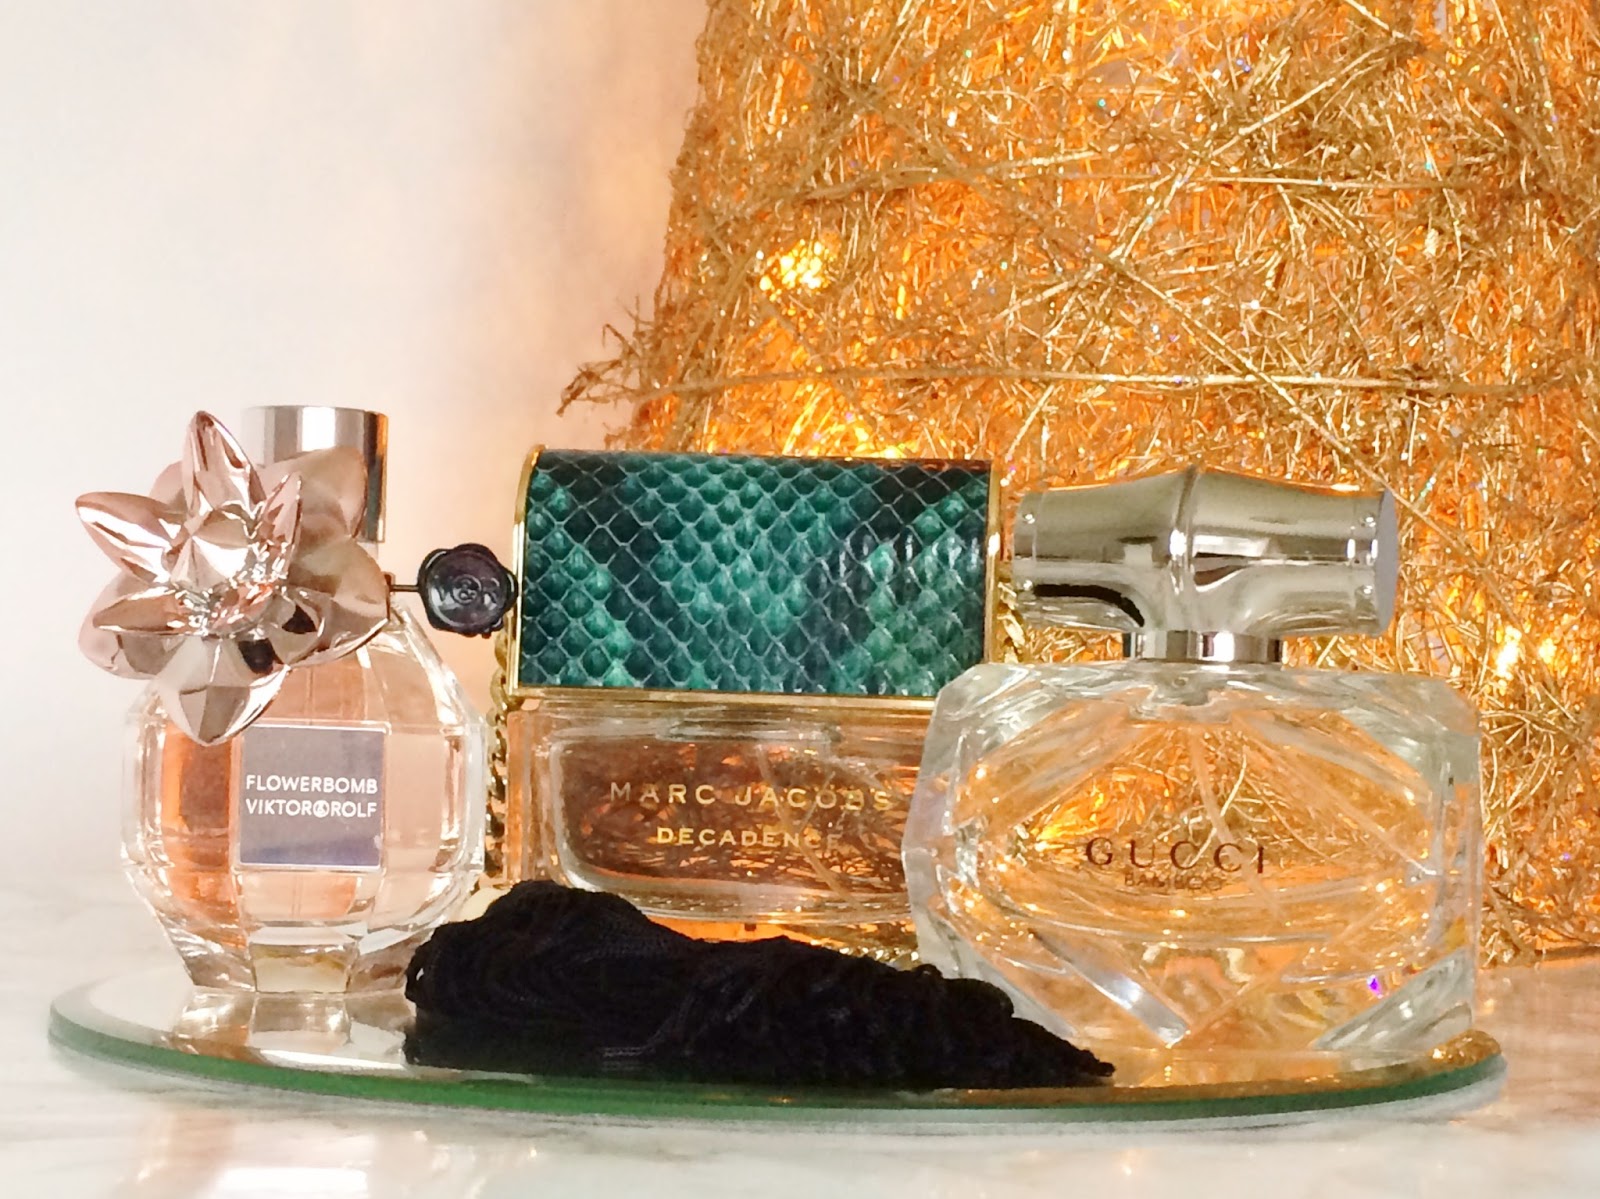 Christmas,Giveaway, Viktor & Rolf, Flowerbomb, Marc Jacobs, Divine Decadence, Gucci Bamboo